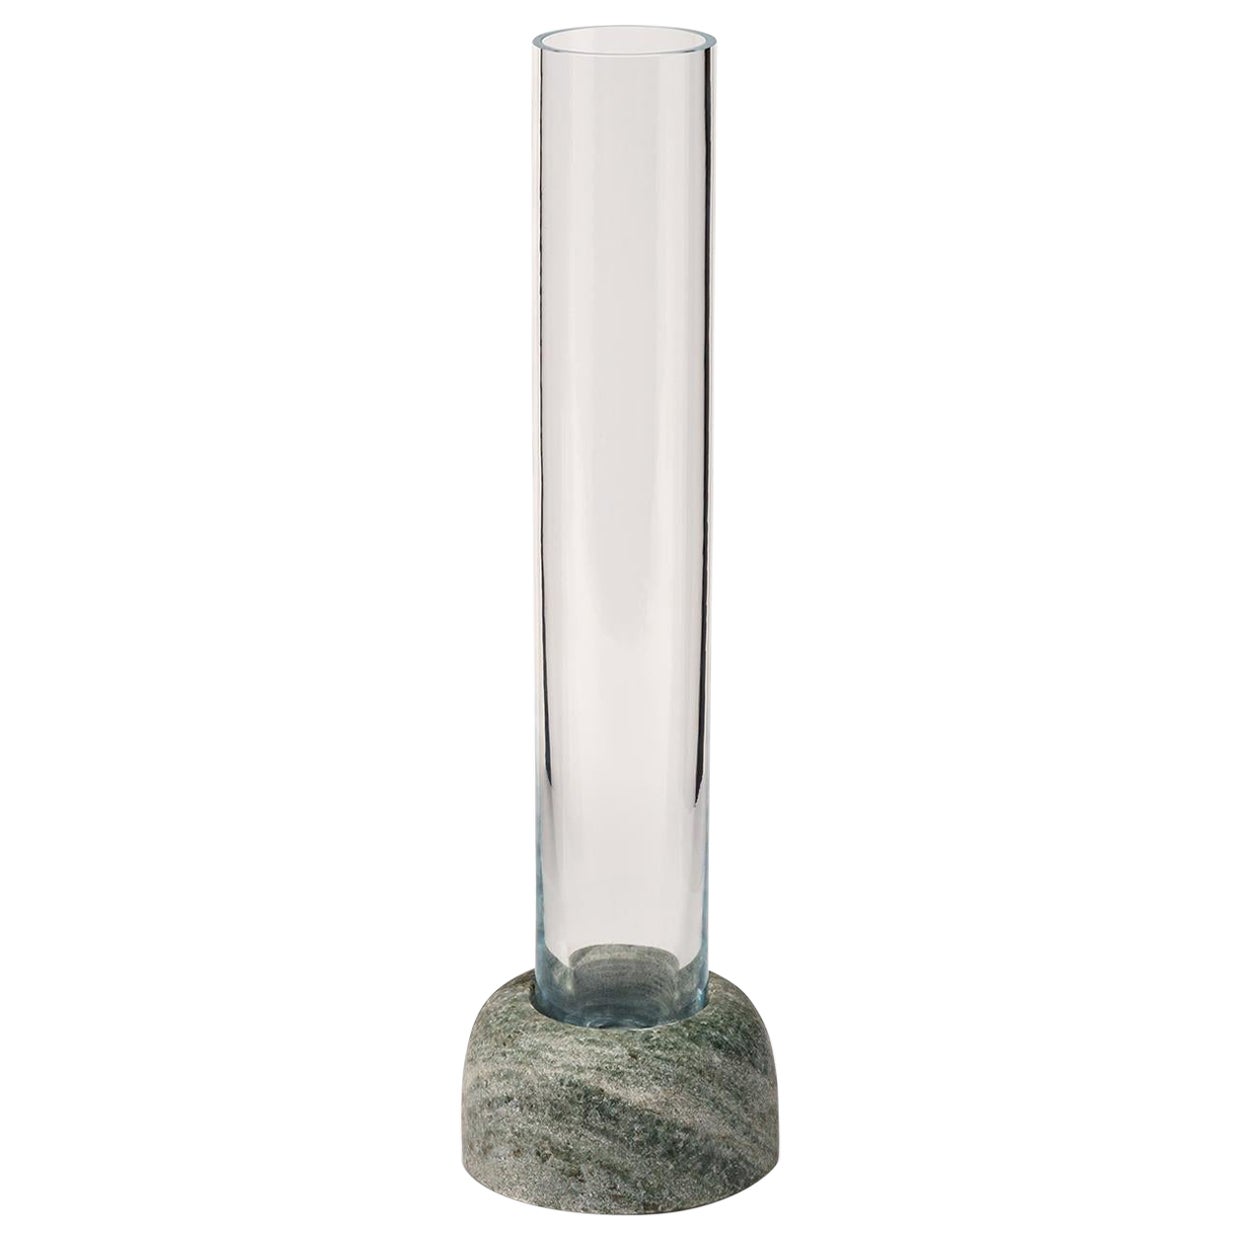 Minimalist Vase in Serpa Marble and Glass - Small For Sale